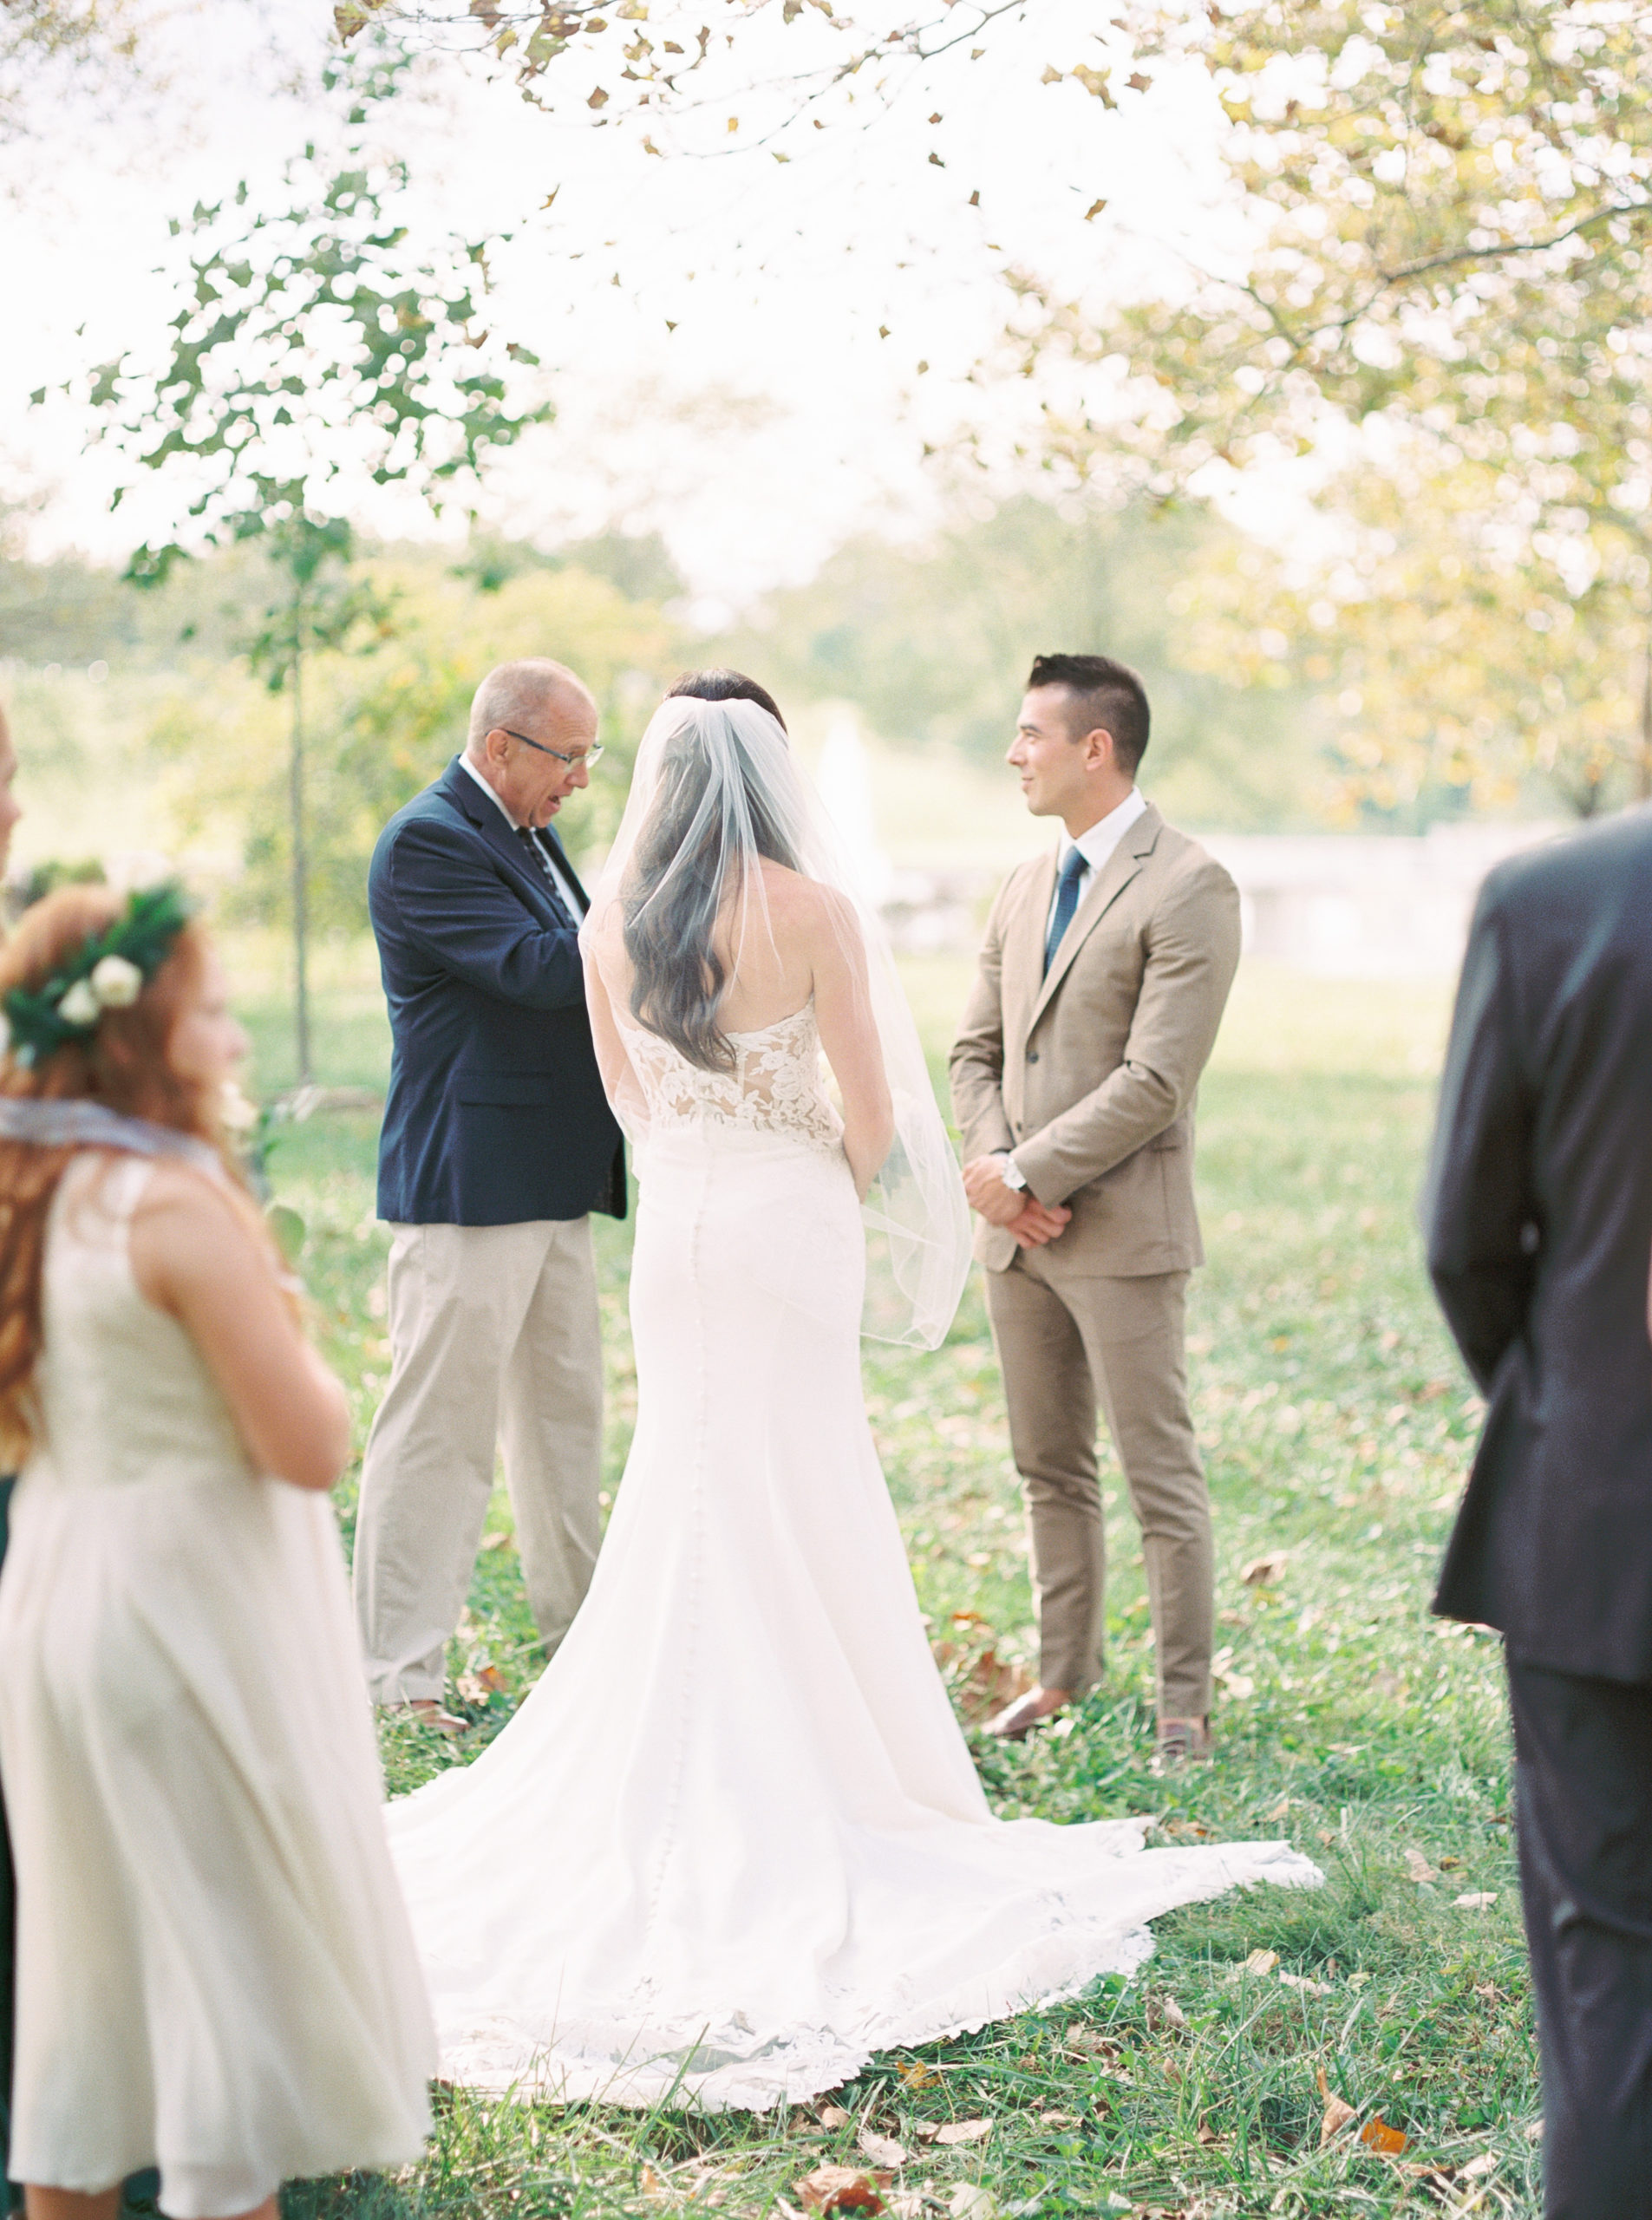 Fall Forest Park Wedding Ceremony at the grand basin